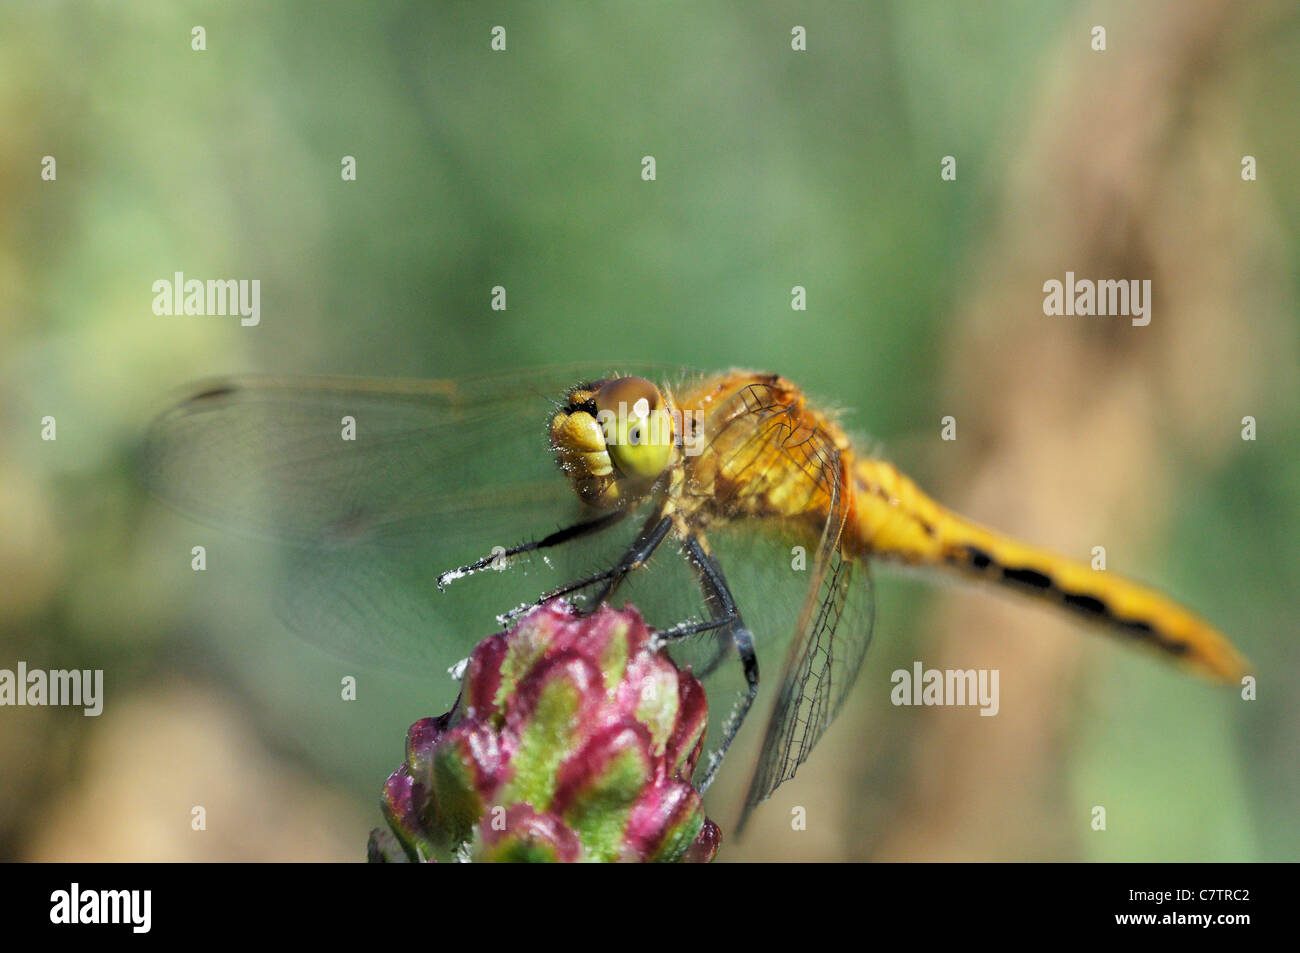 A macro shot of a yellow dragonfly atop a flower in Saskatchewan, Canada Stock Photo